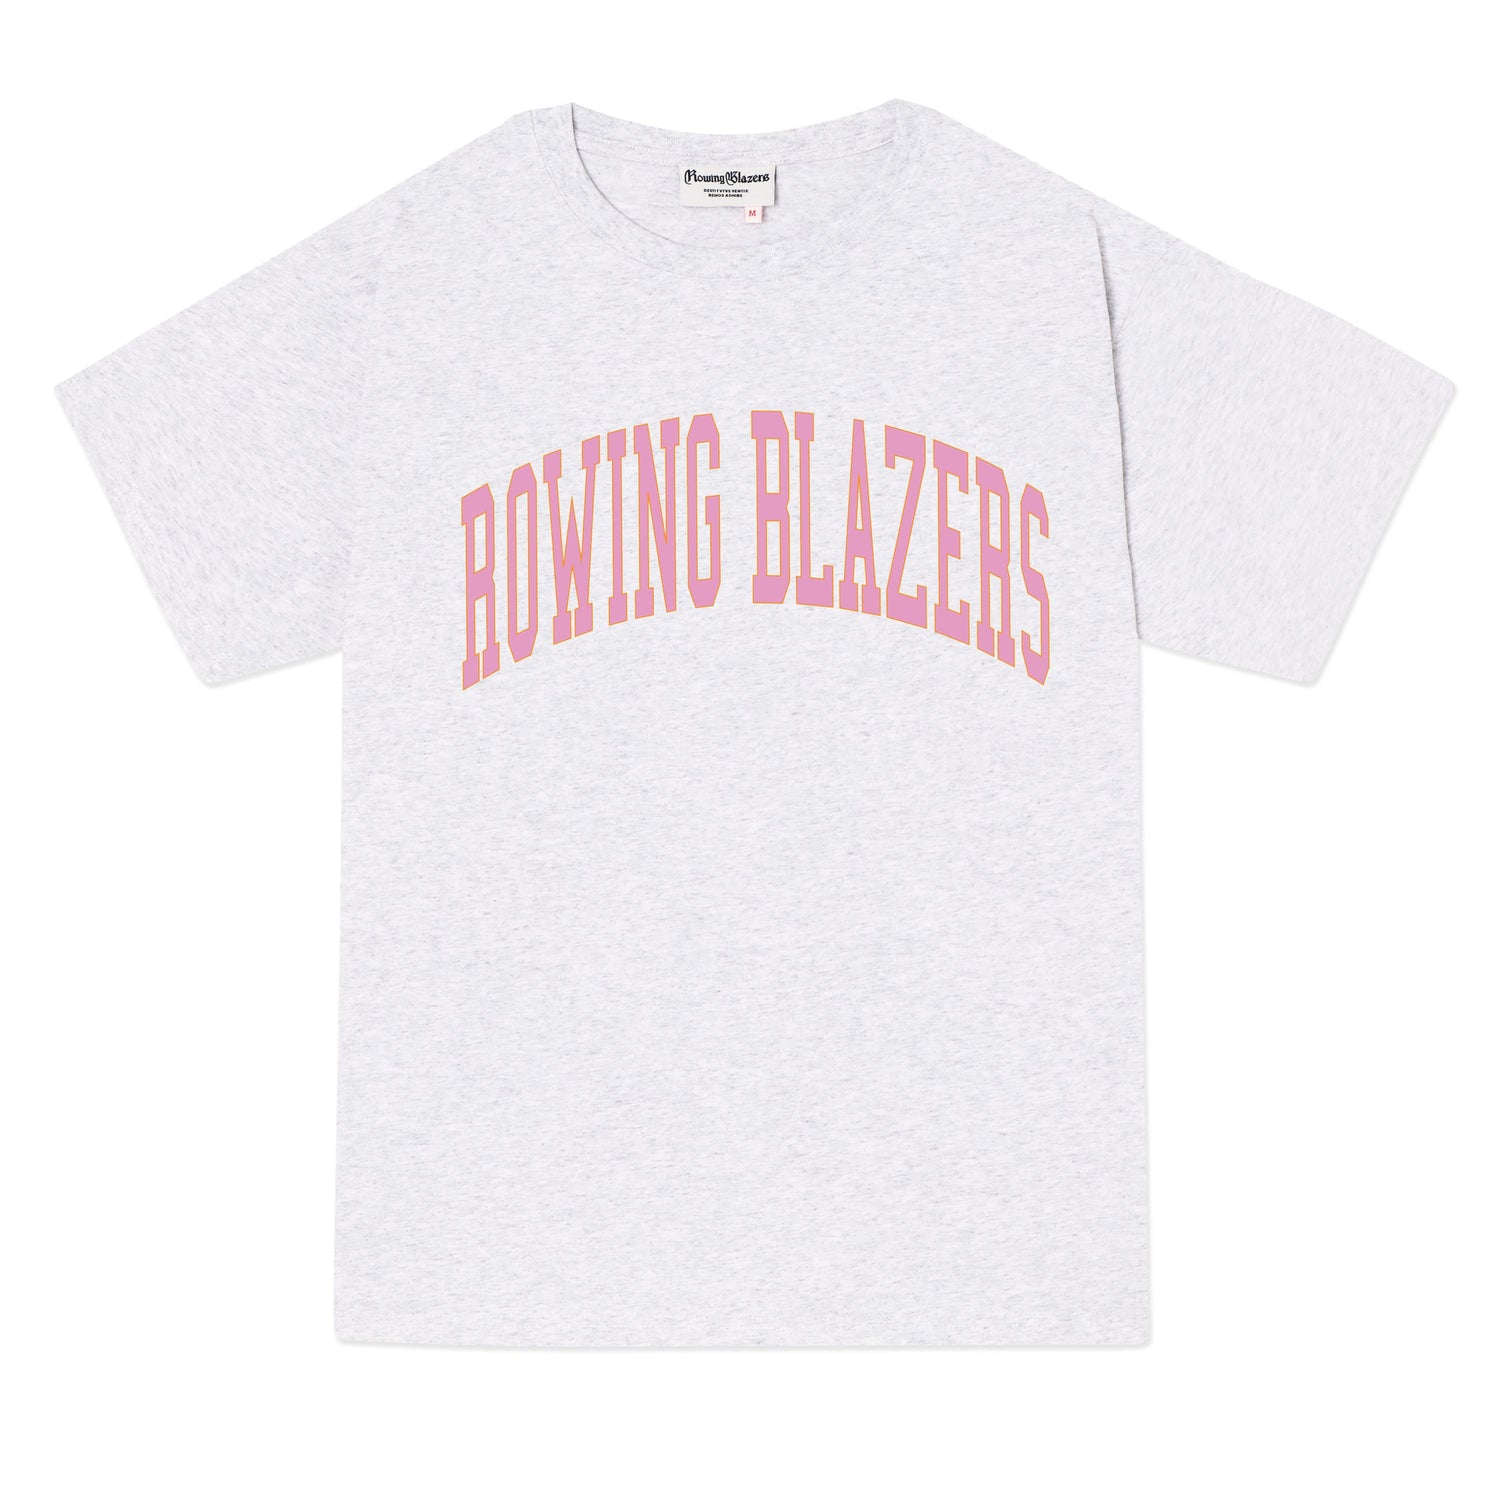 Classic light heather gray collegiate tee with "Rowing Blazers" across the front in pink.